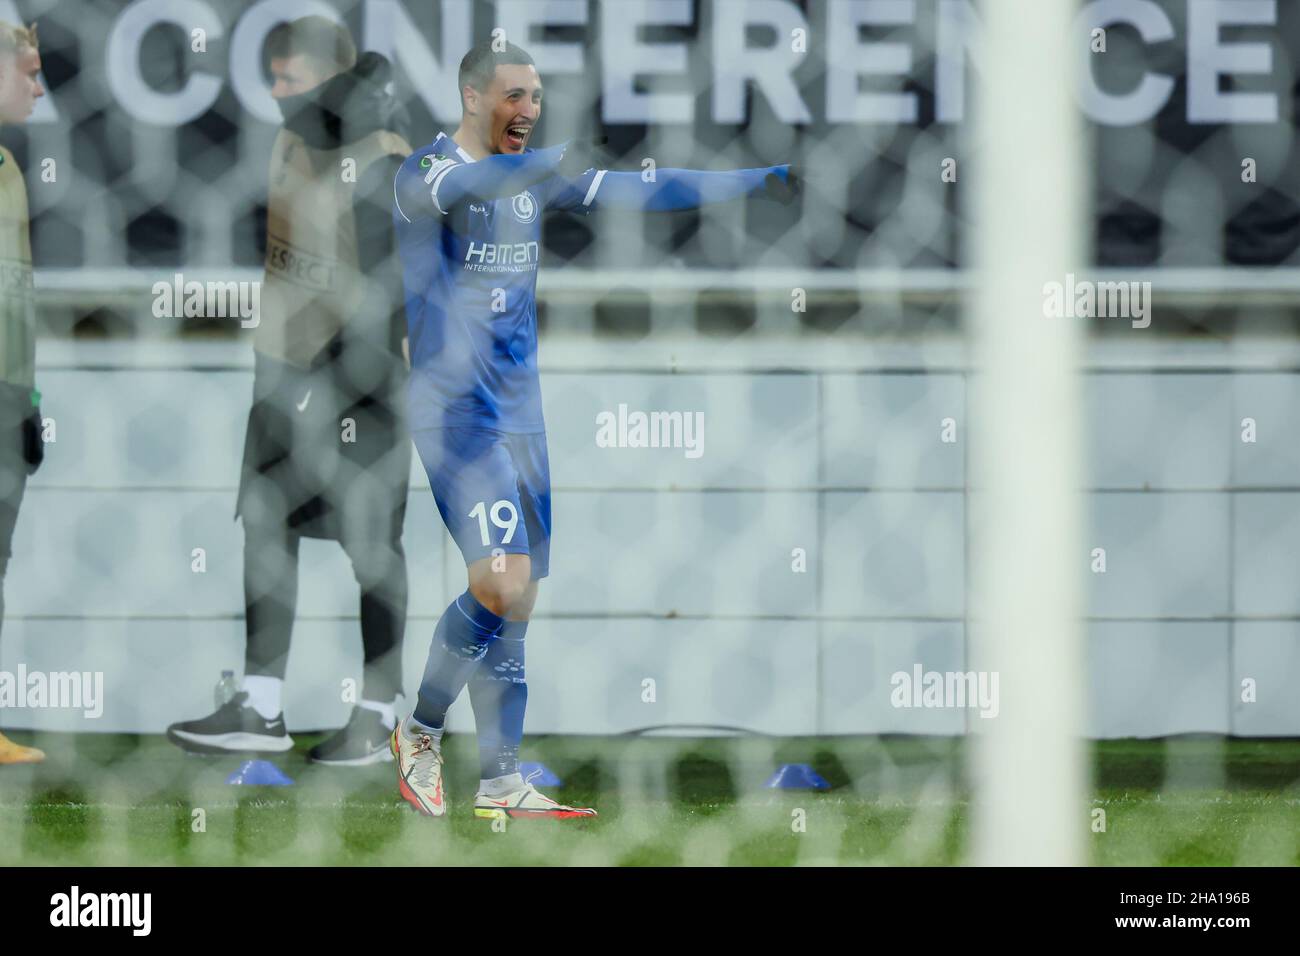 GENT, BELGIUM - JANUARY 9: Gianni Bruno is celebrating his goal during the UEFA Europa Conference League Group stage match between KAA Gent and FC Flora Tallinn at Ghelamco Arena on January 9, 2021 in Gent, Belgium (Photo by Geert van Erven/Orange Pictures) Stock Photo